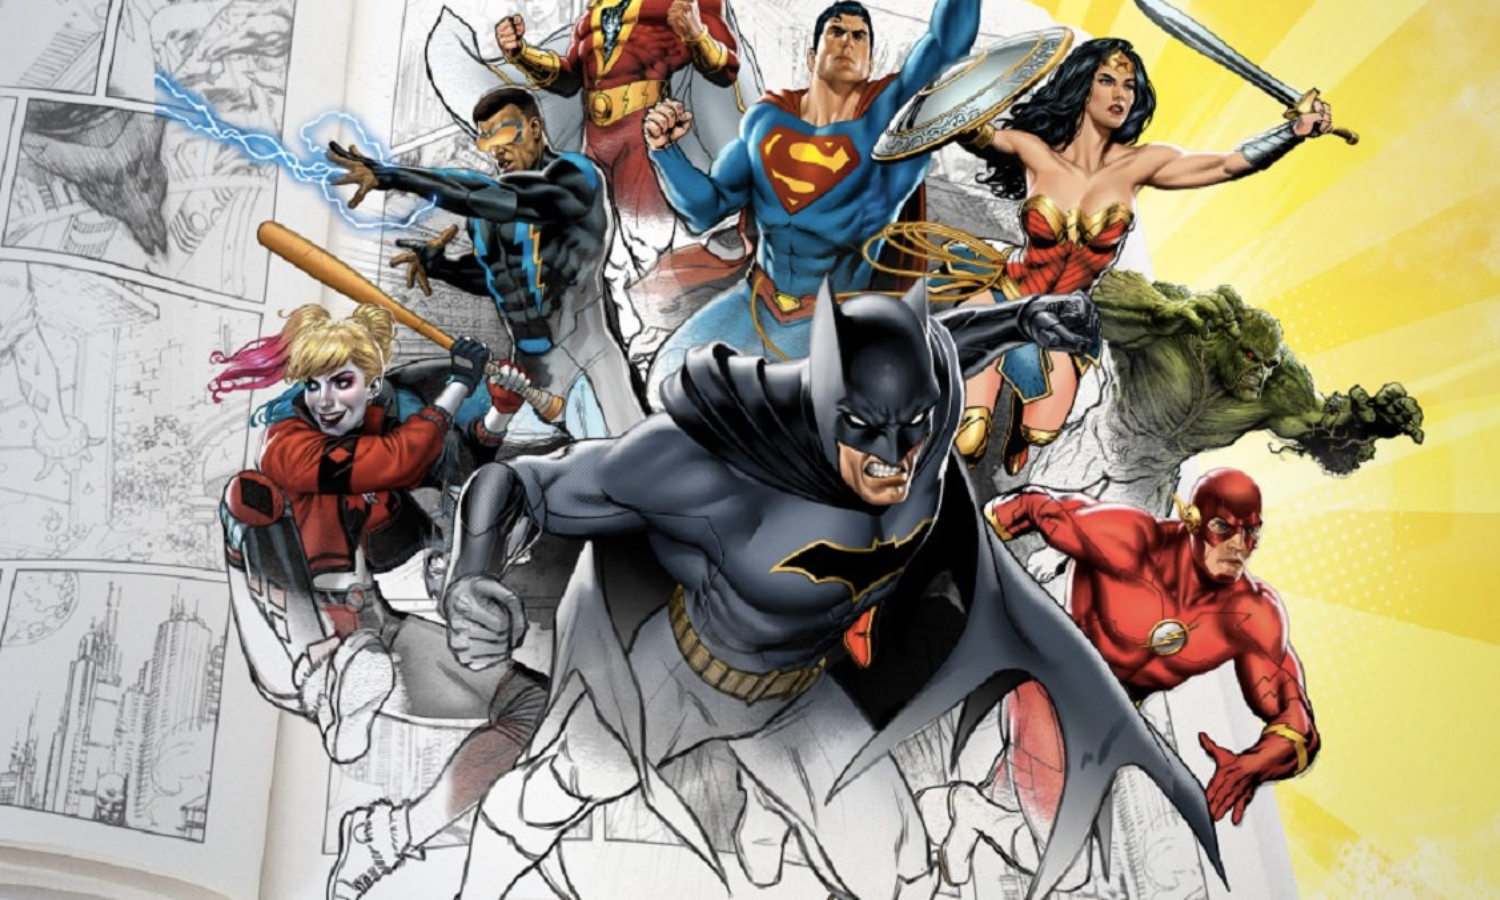 What does dc comics stand for?